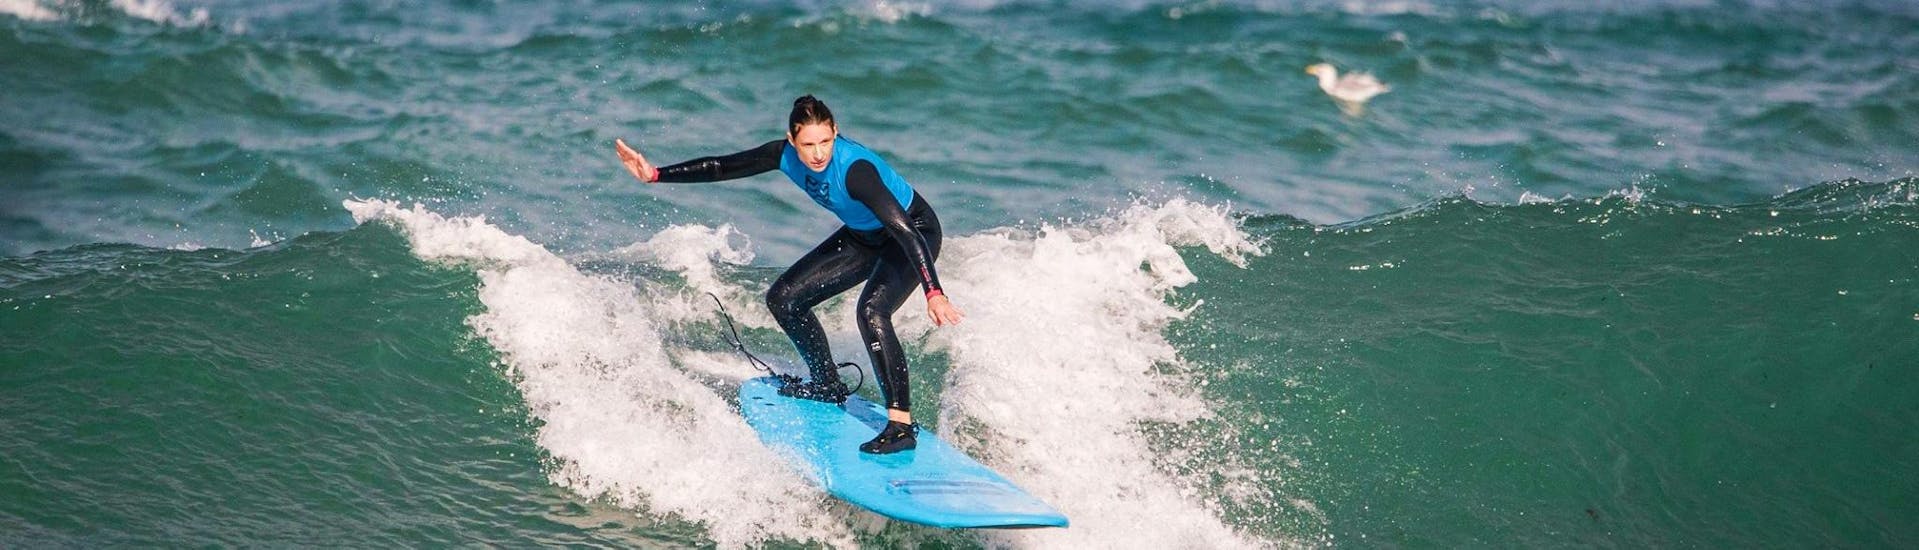 An experienced surfer is enjoying the perfect surfing conditions at Portugal's Atlantic coast during the Advanced Surf Lessons at Gamboa Beach in Peniche with Go4Surf Peniche.